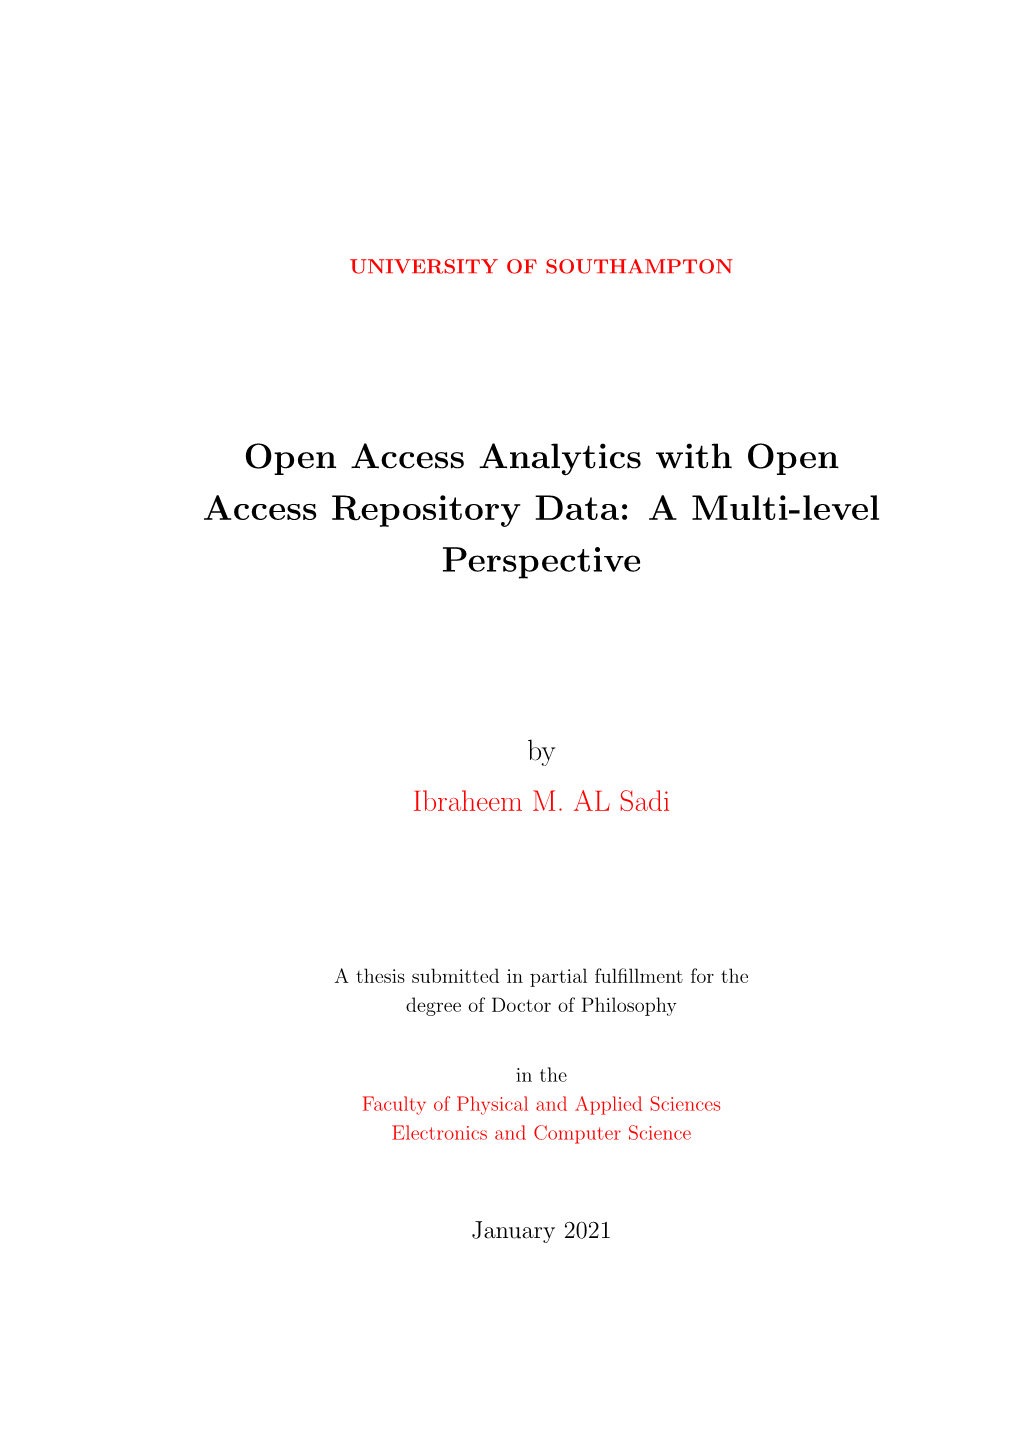 Open Access Analytics with Open Access Repository Data: a Multi-Level Perspective